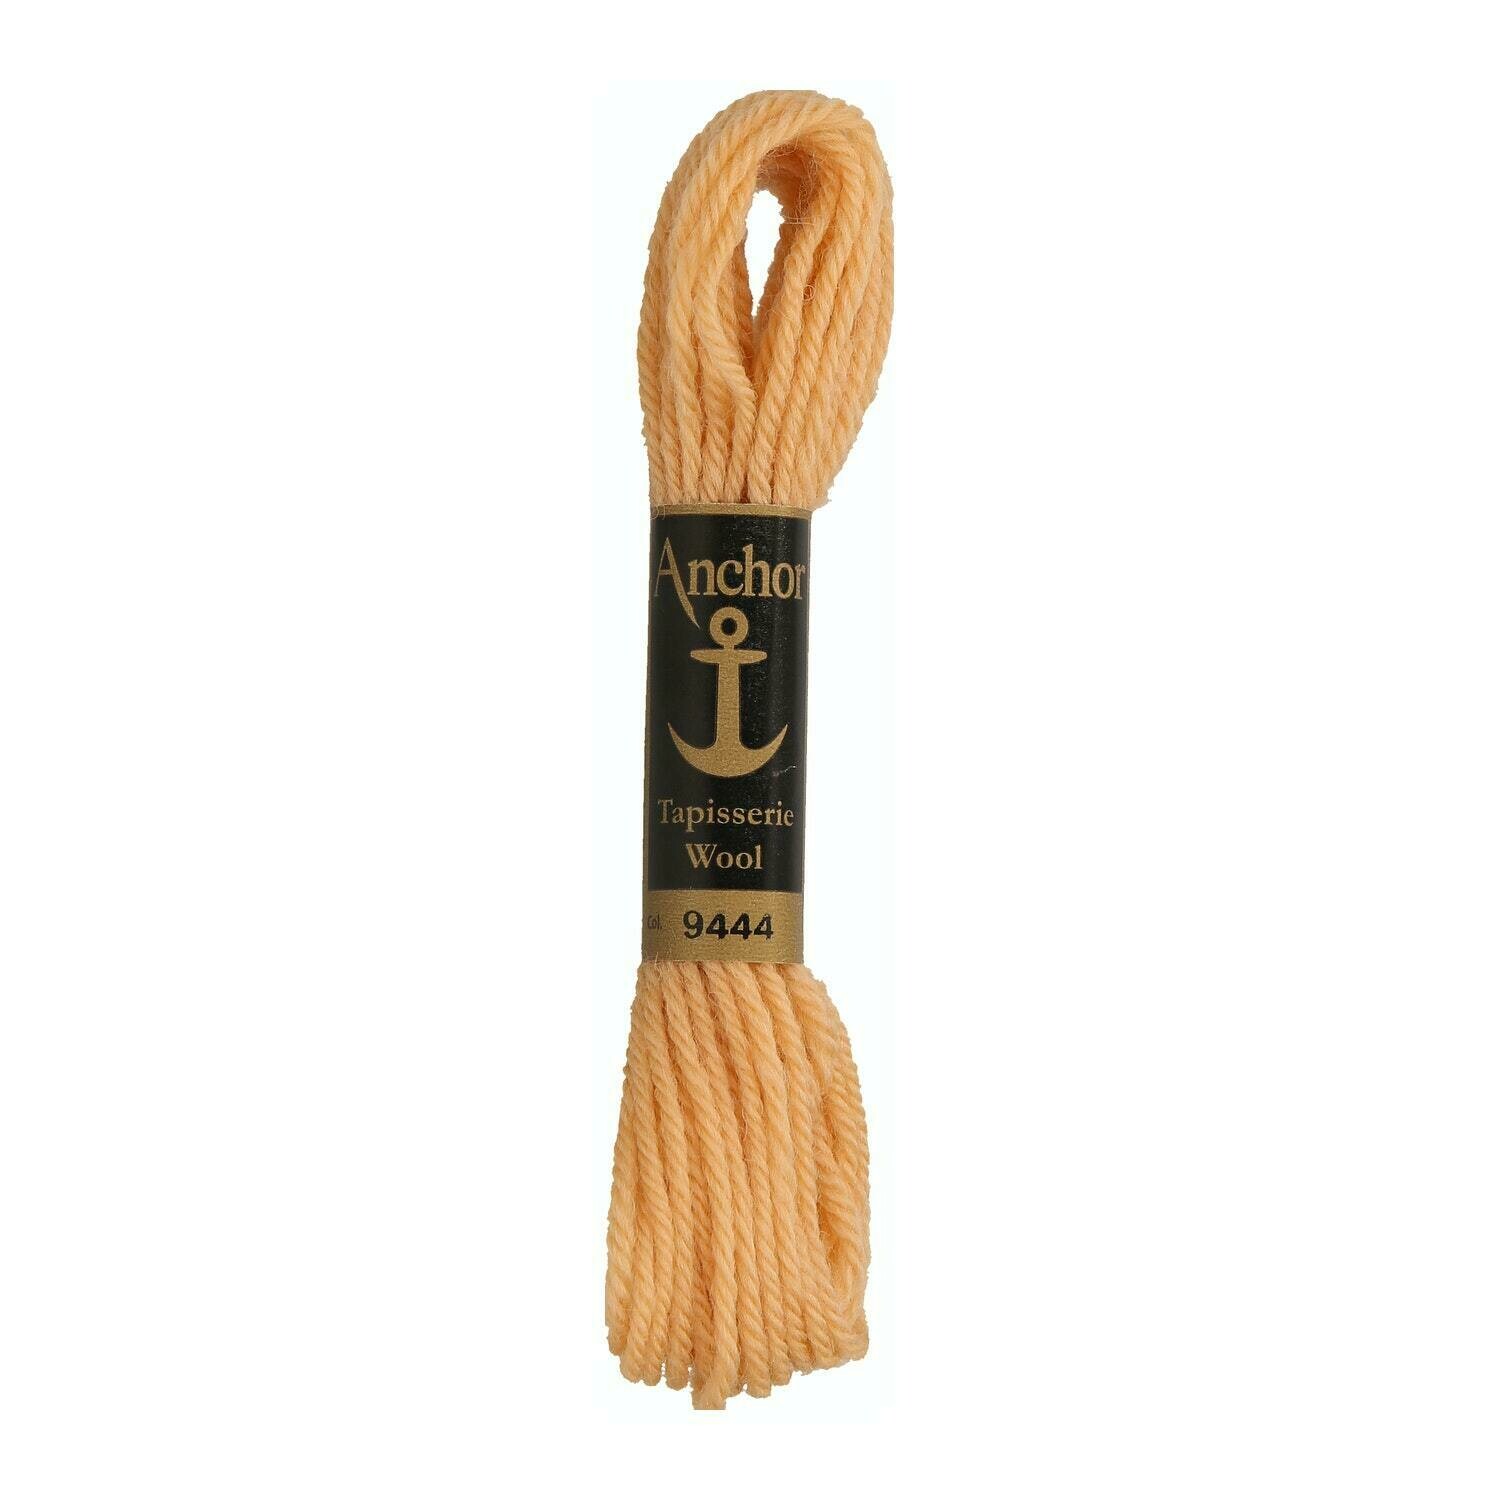 Anchor Tapisserie Wool #09444